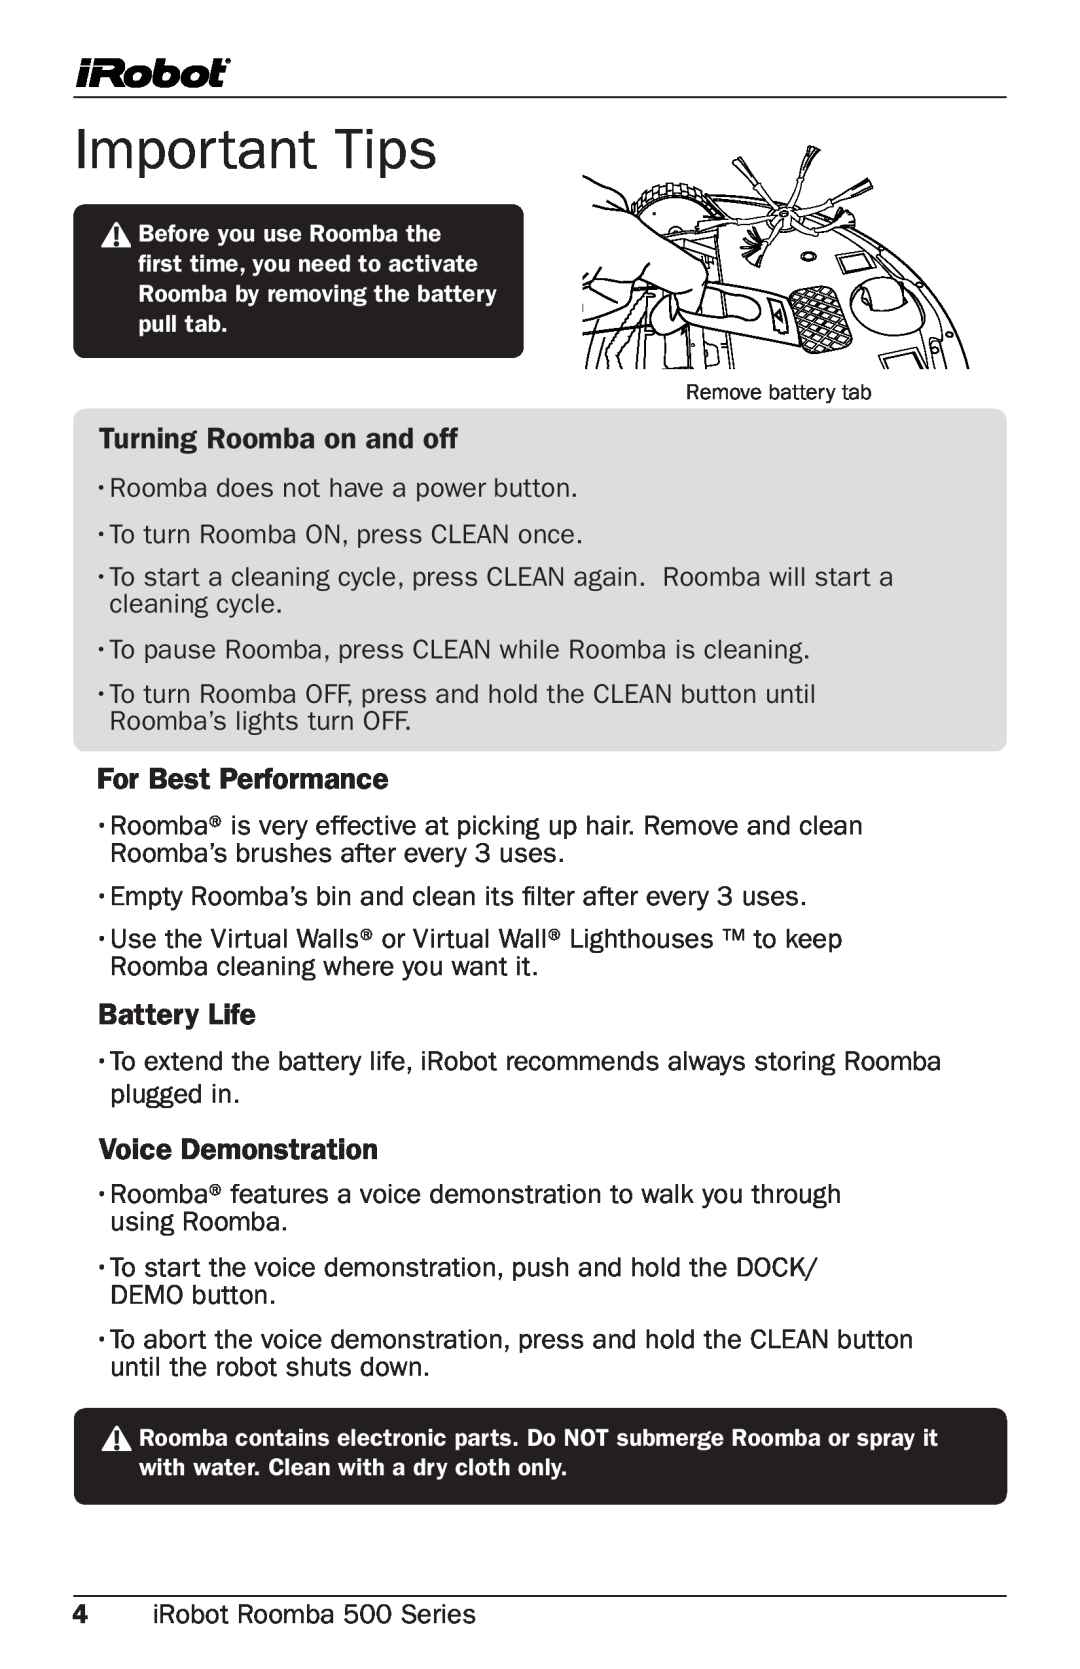 iRobot 500 Series manual Important Tips, Turning Roomba on and off, For Best Performance, Battery Life, Voice Demonstration 